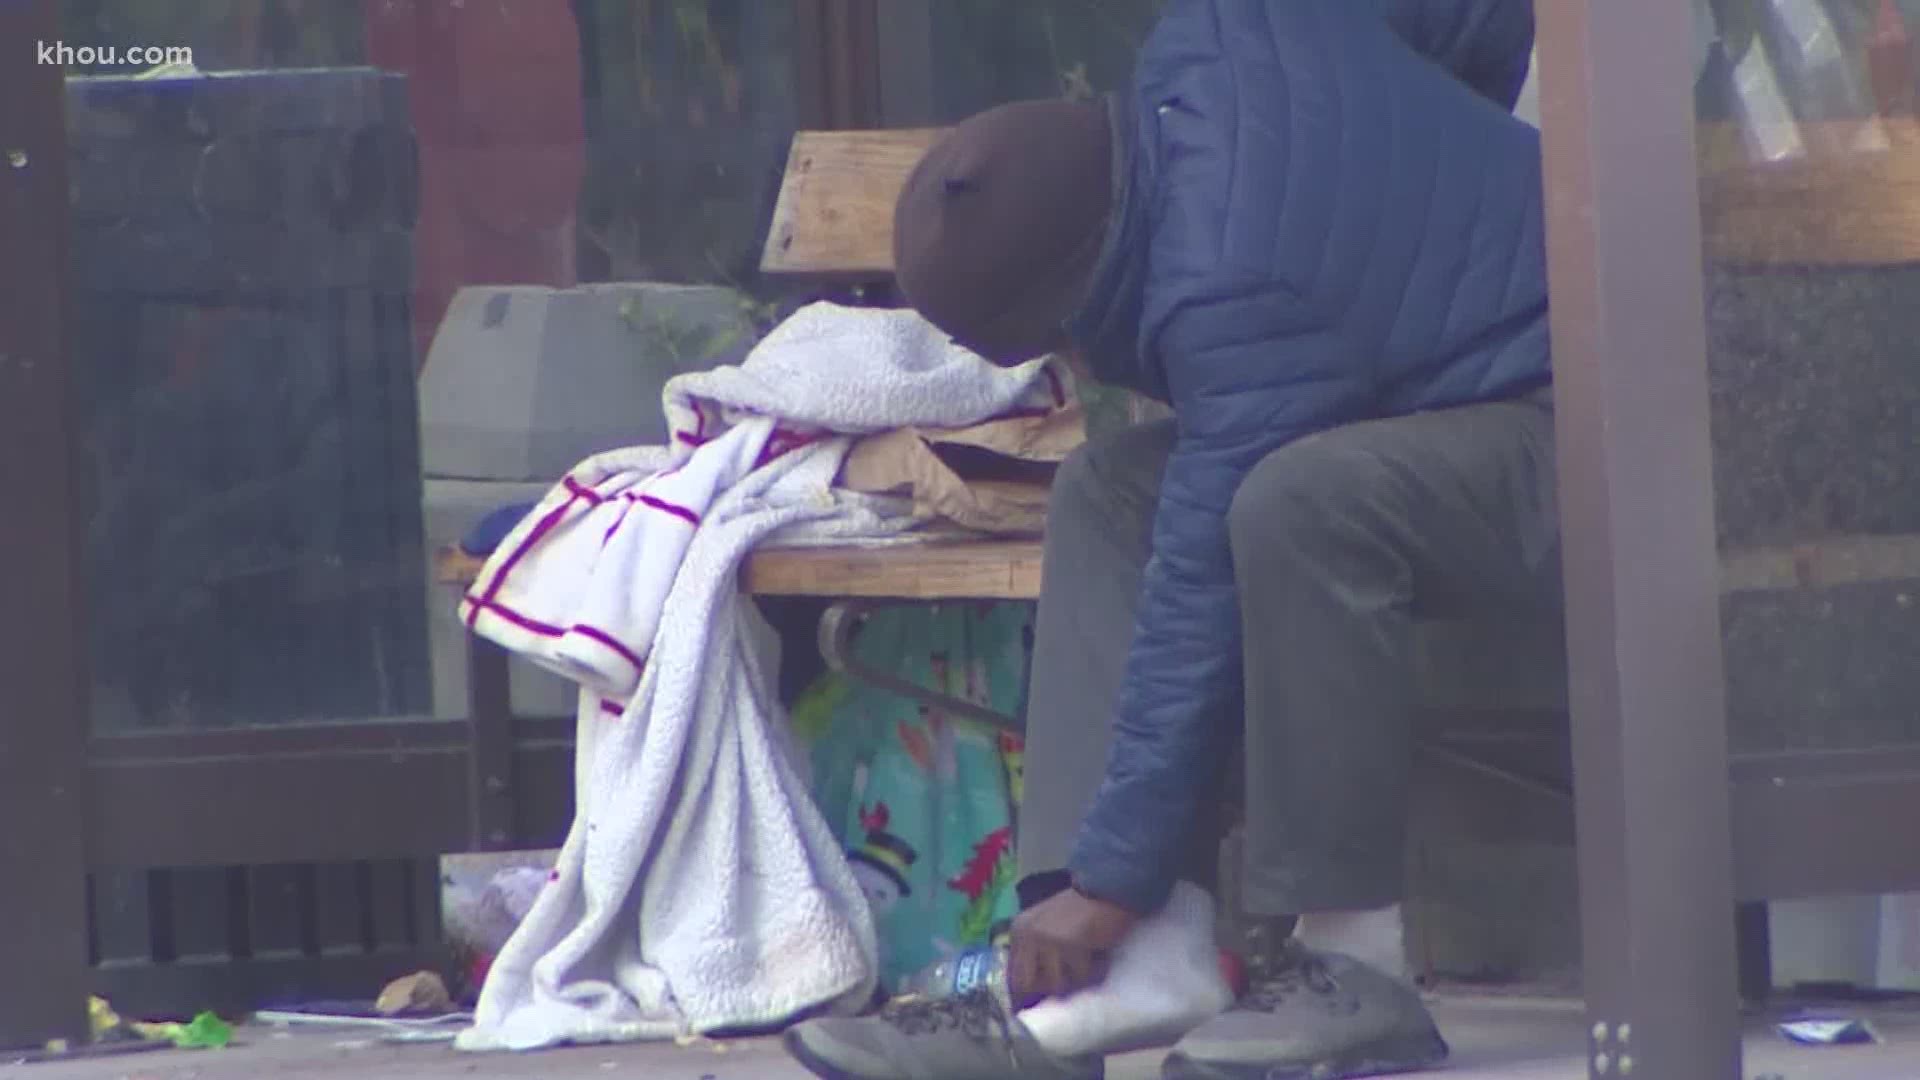 As winter approaches, local groups are trying to find ways to help homeless people find shelter from the cold while slowing the spread of COVID-19.